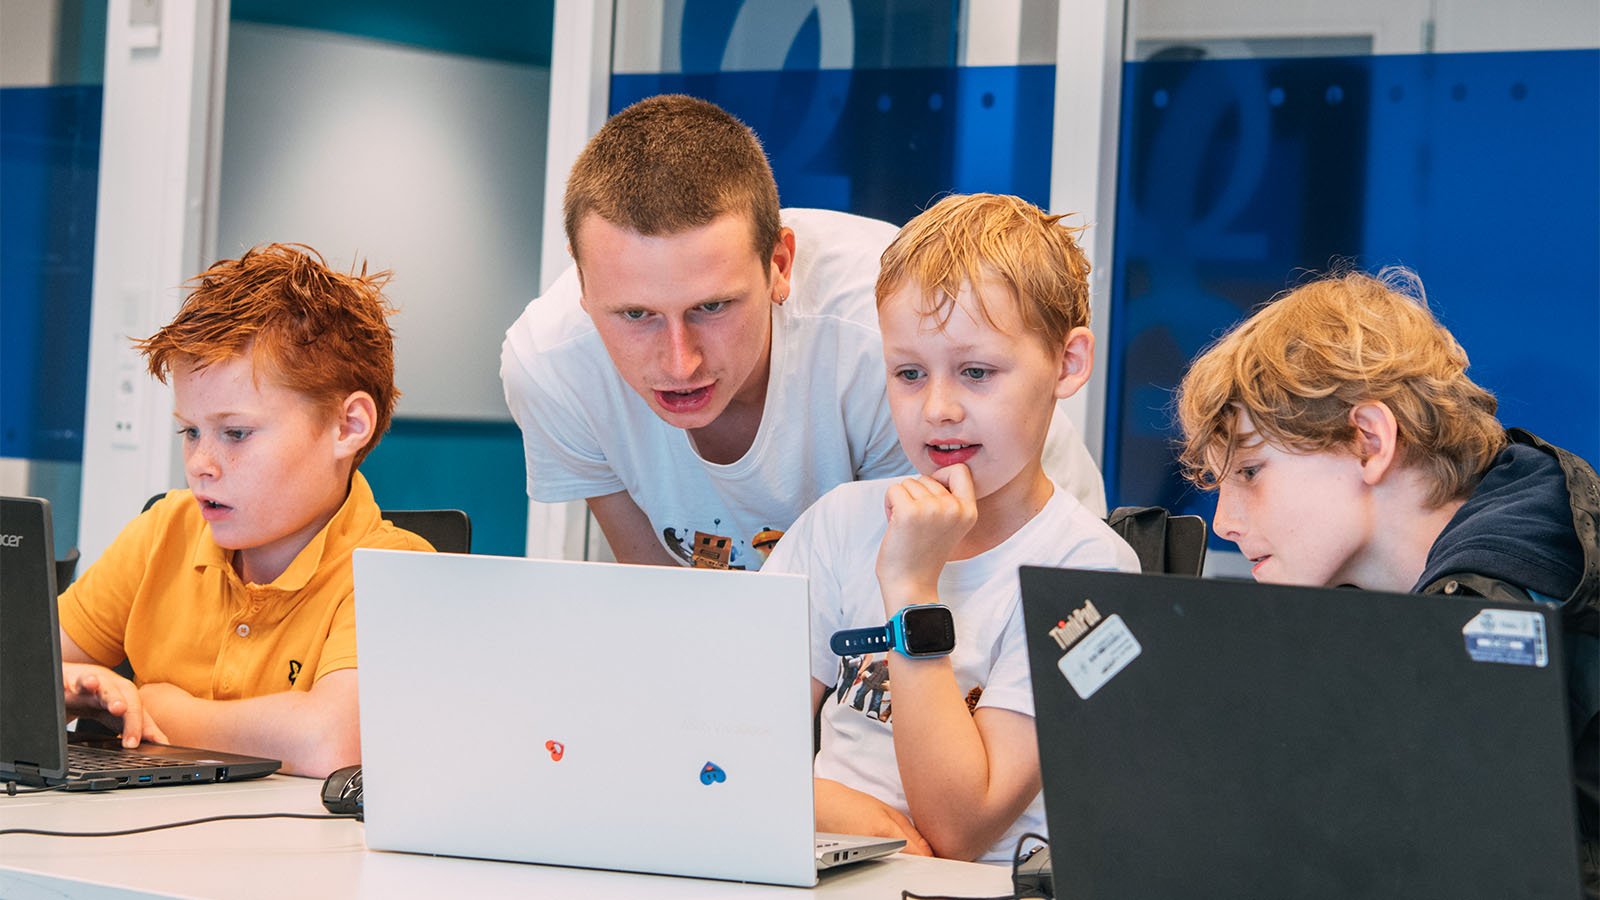 Partners in Coding: Learnlink and Ardoq Teaching Kids to Code